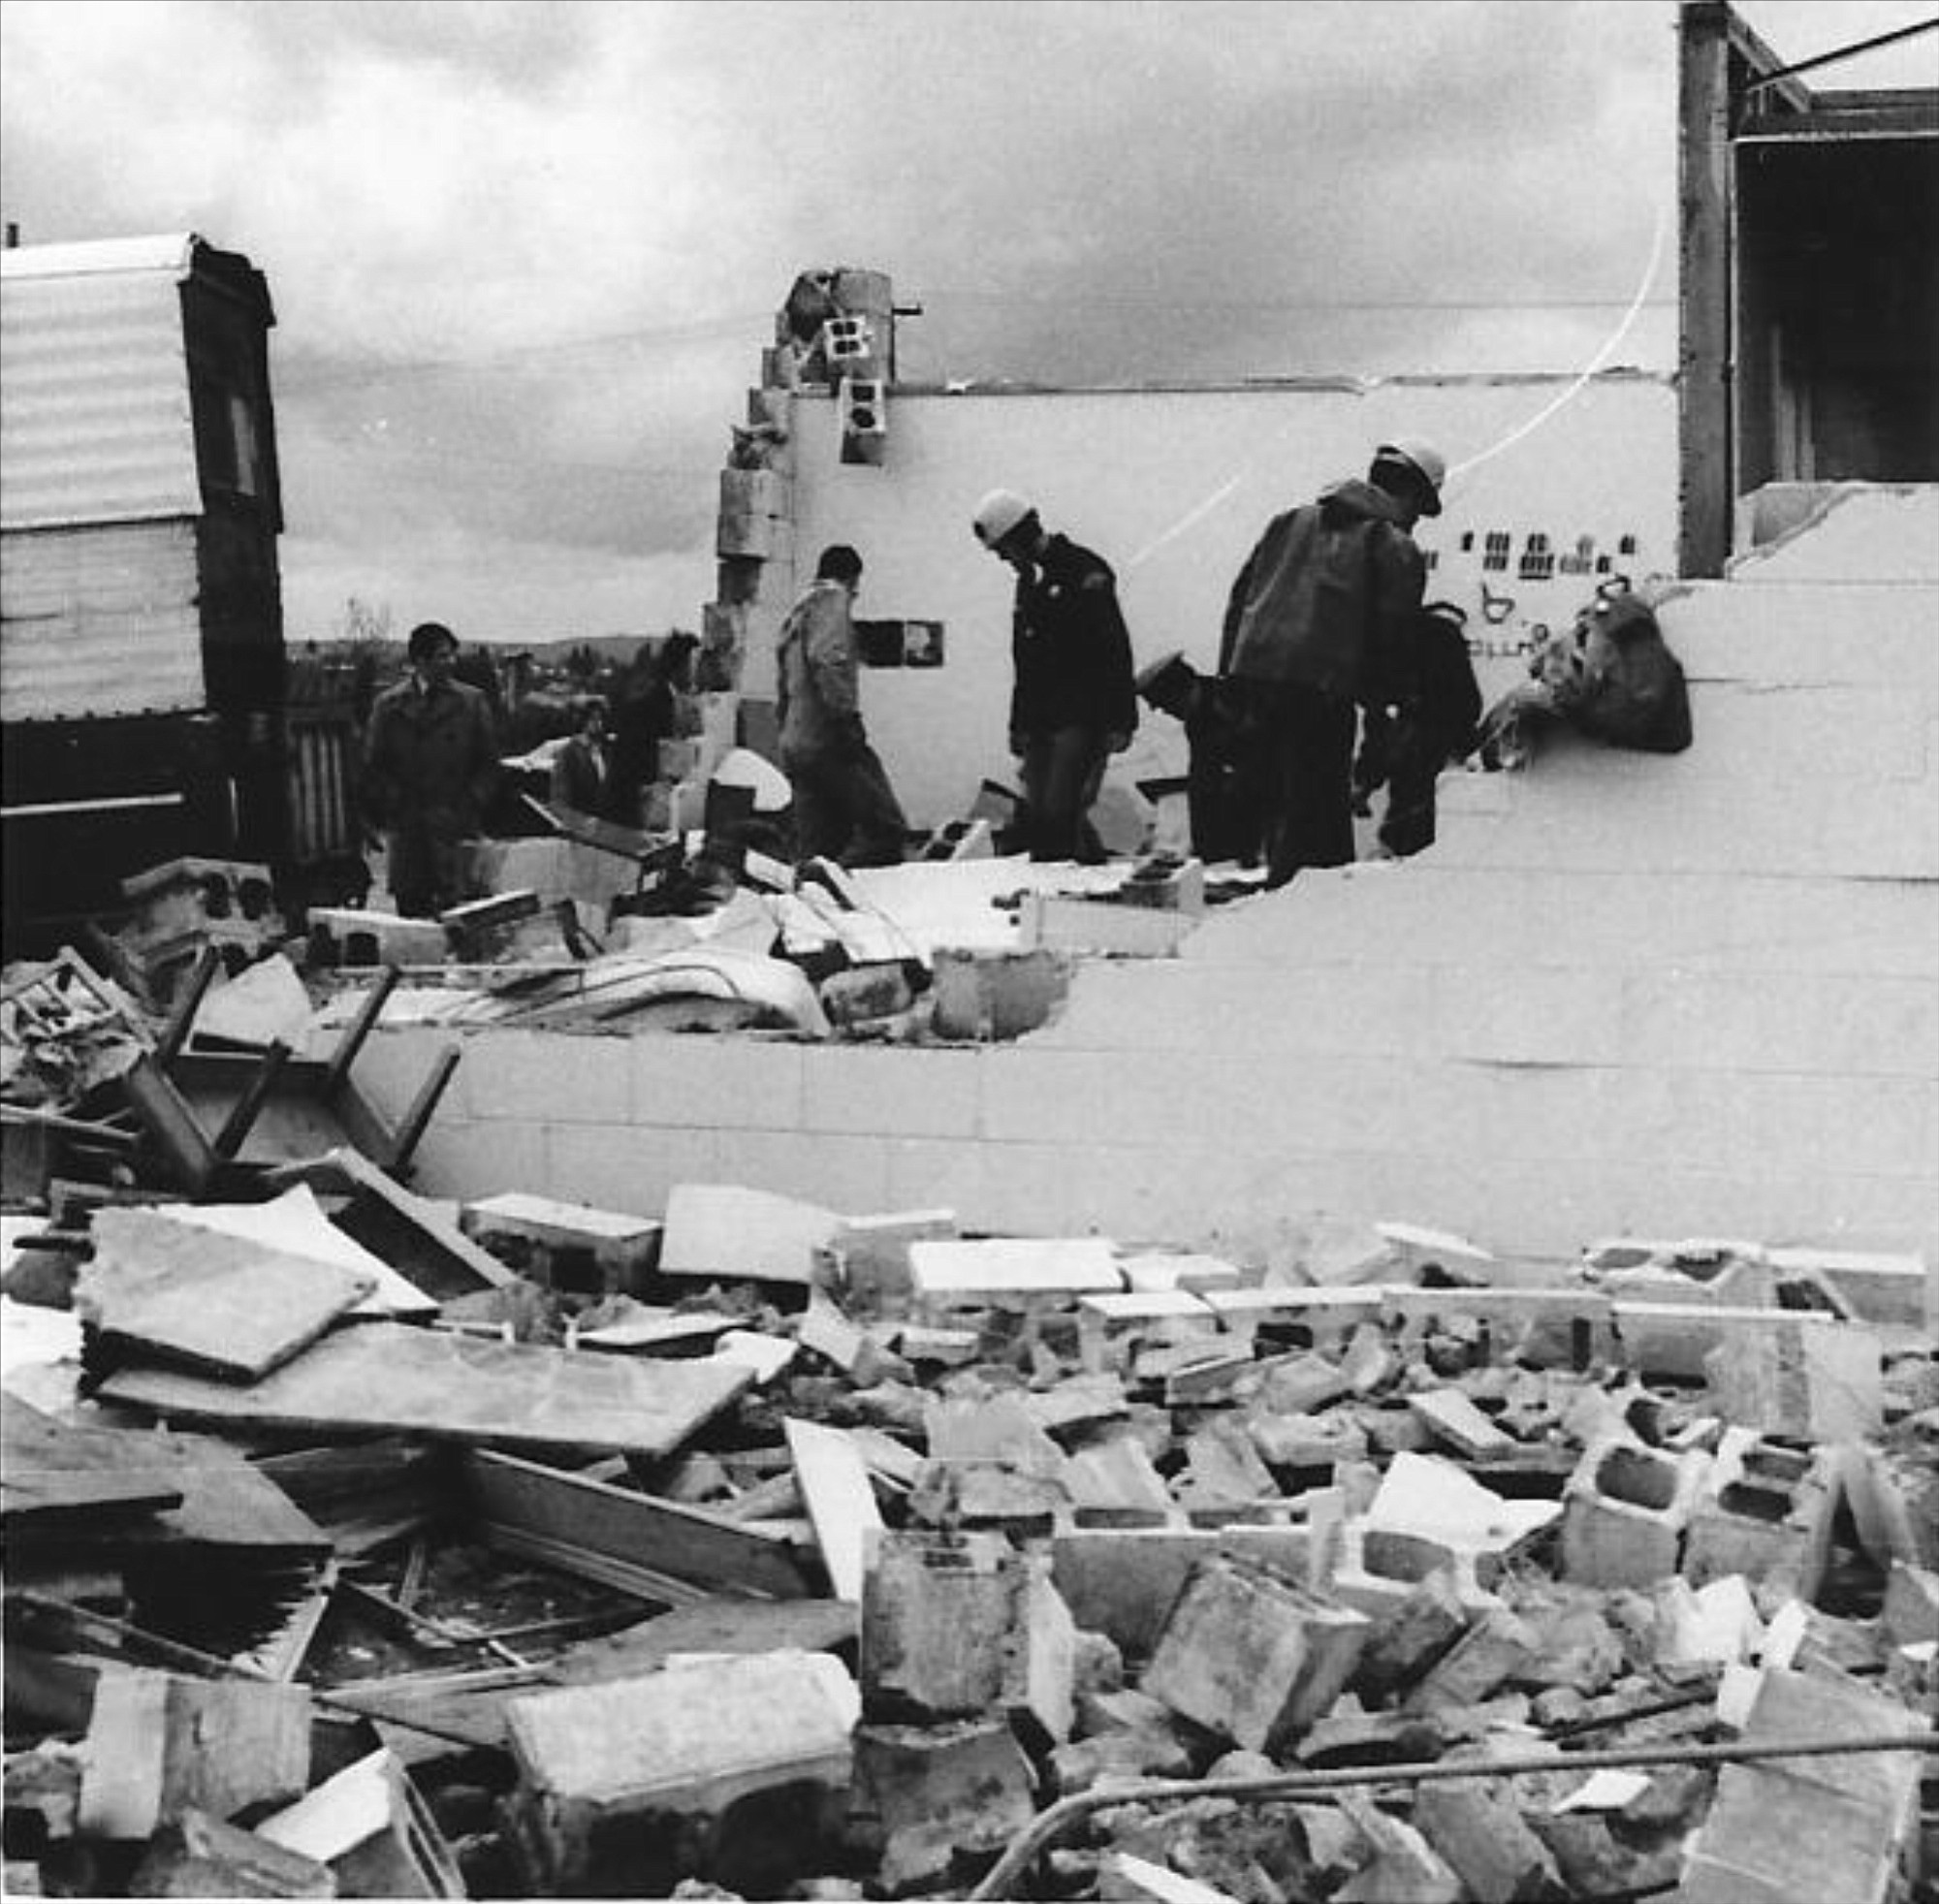 Larry Crispien took photographs of damage from the tornado that touched down in Vancouver on April 5, 1972.